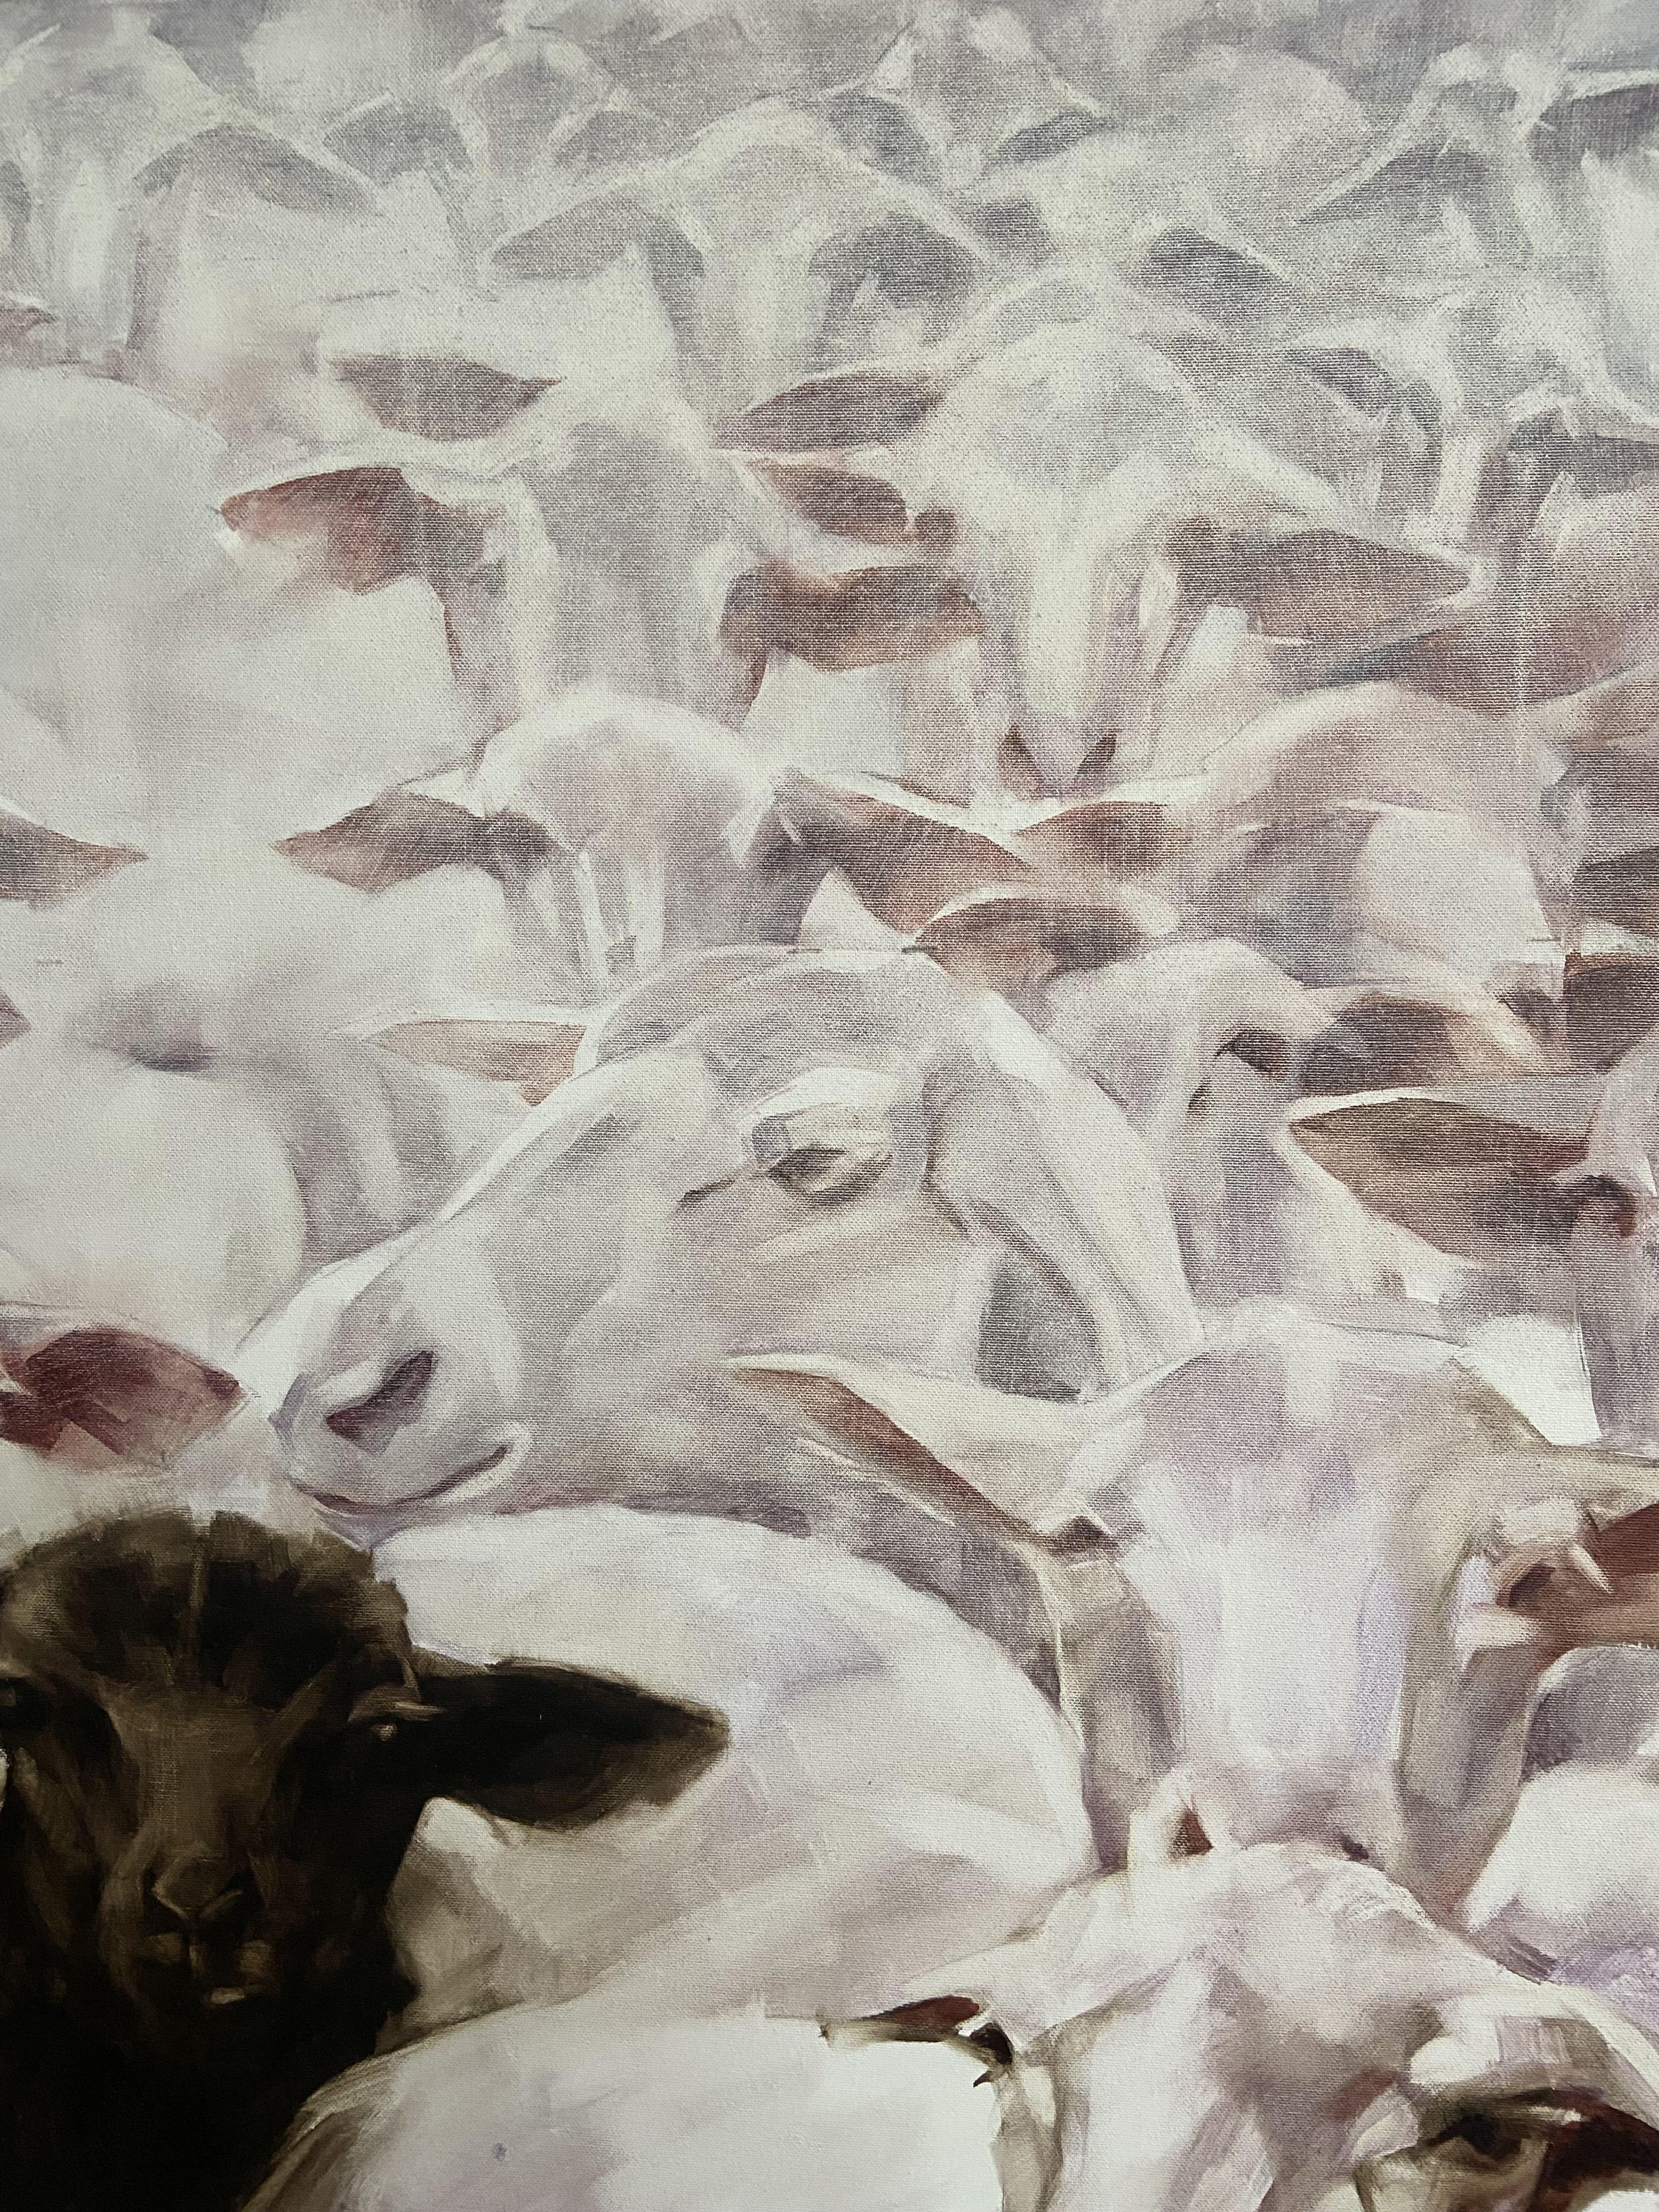 Black sheep., Painting, Oil on Canvas 2